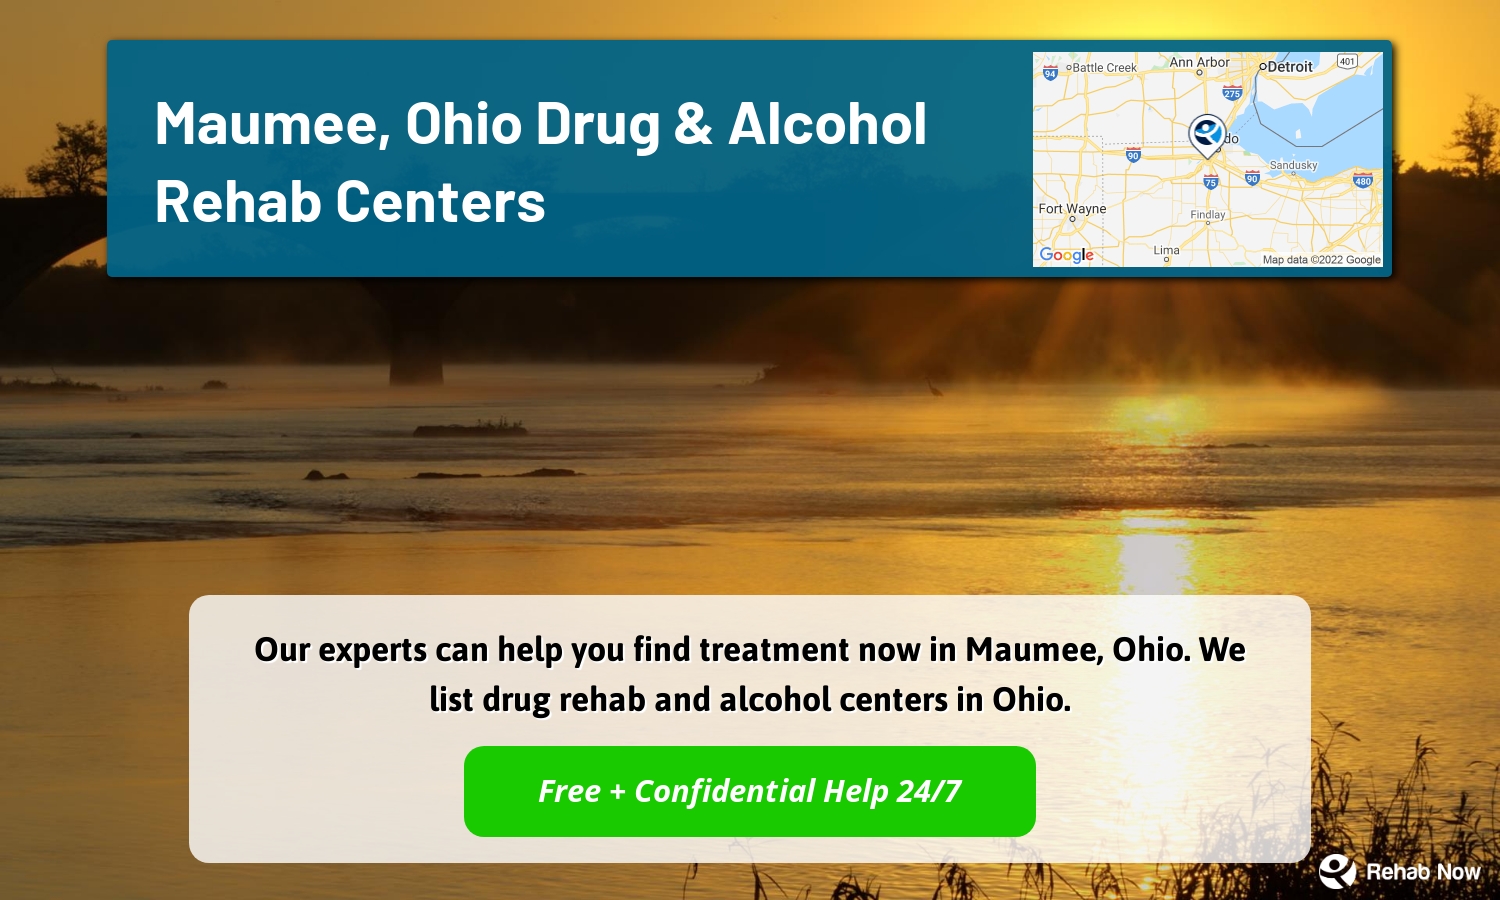 Our experts can help you find treatment now in Maumee, Ohio. We list drug rehab and alcohol centers in Ohio.